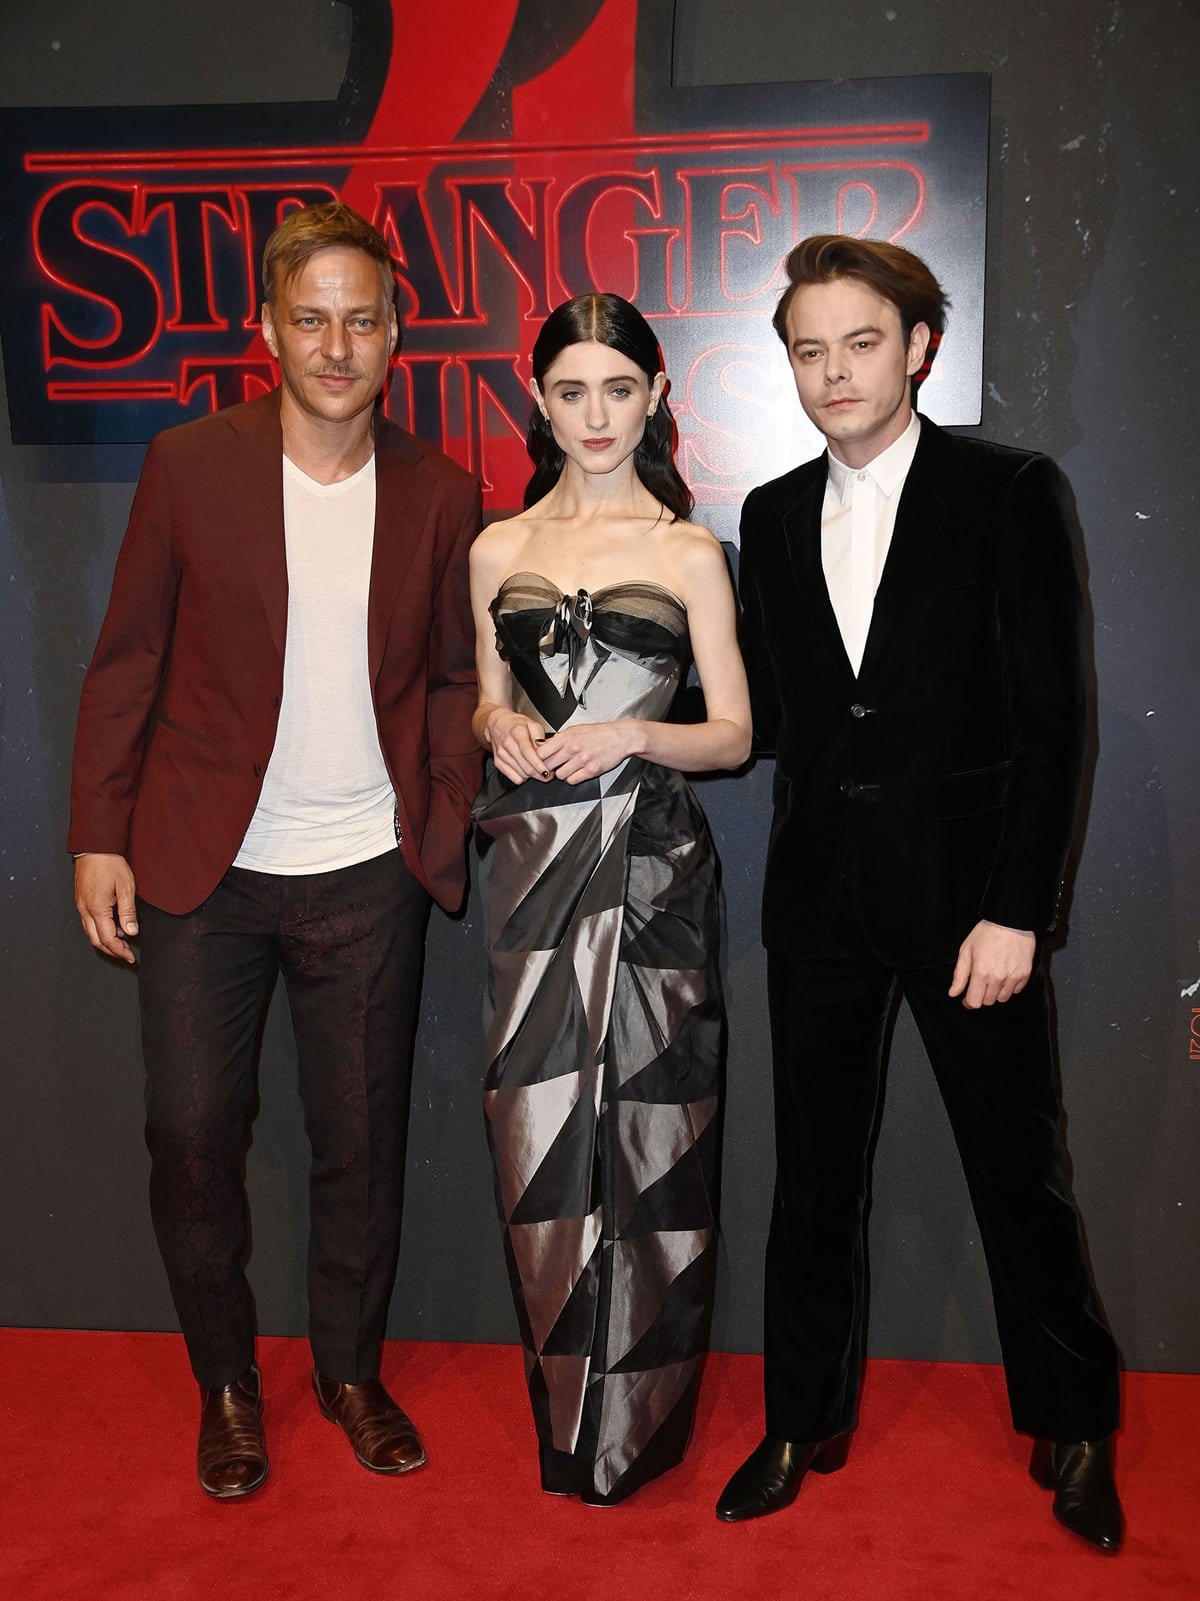 Natalia Dyer in a strapless Vivienne Westwood dress with her taller co-stars Tom Wlaschiha and Charlie Heaton at the screening of the Netflix series "Stranger Things" Season 4